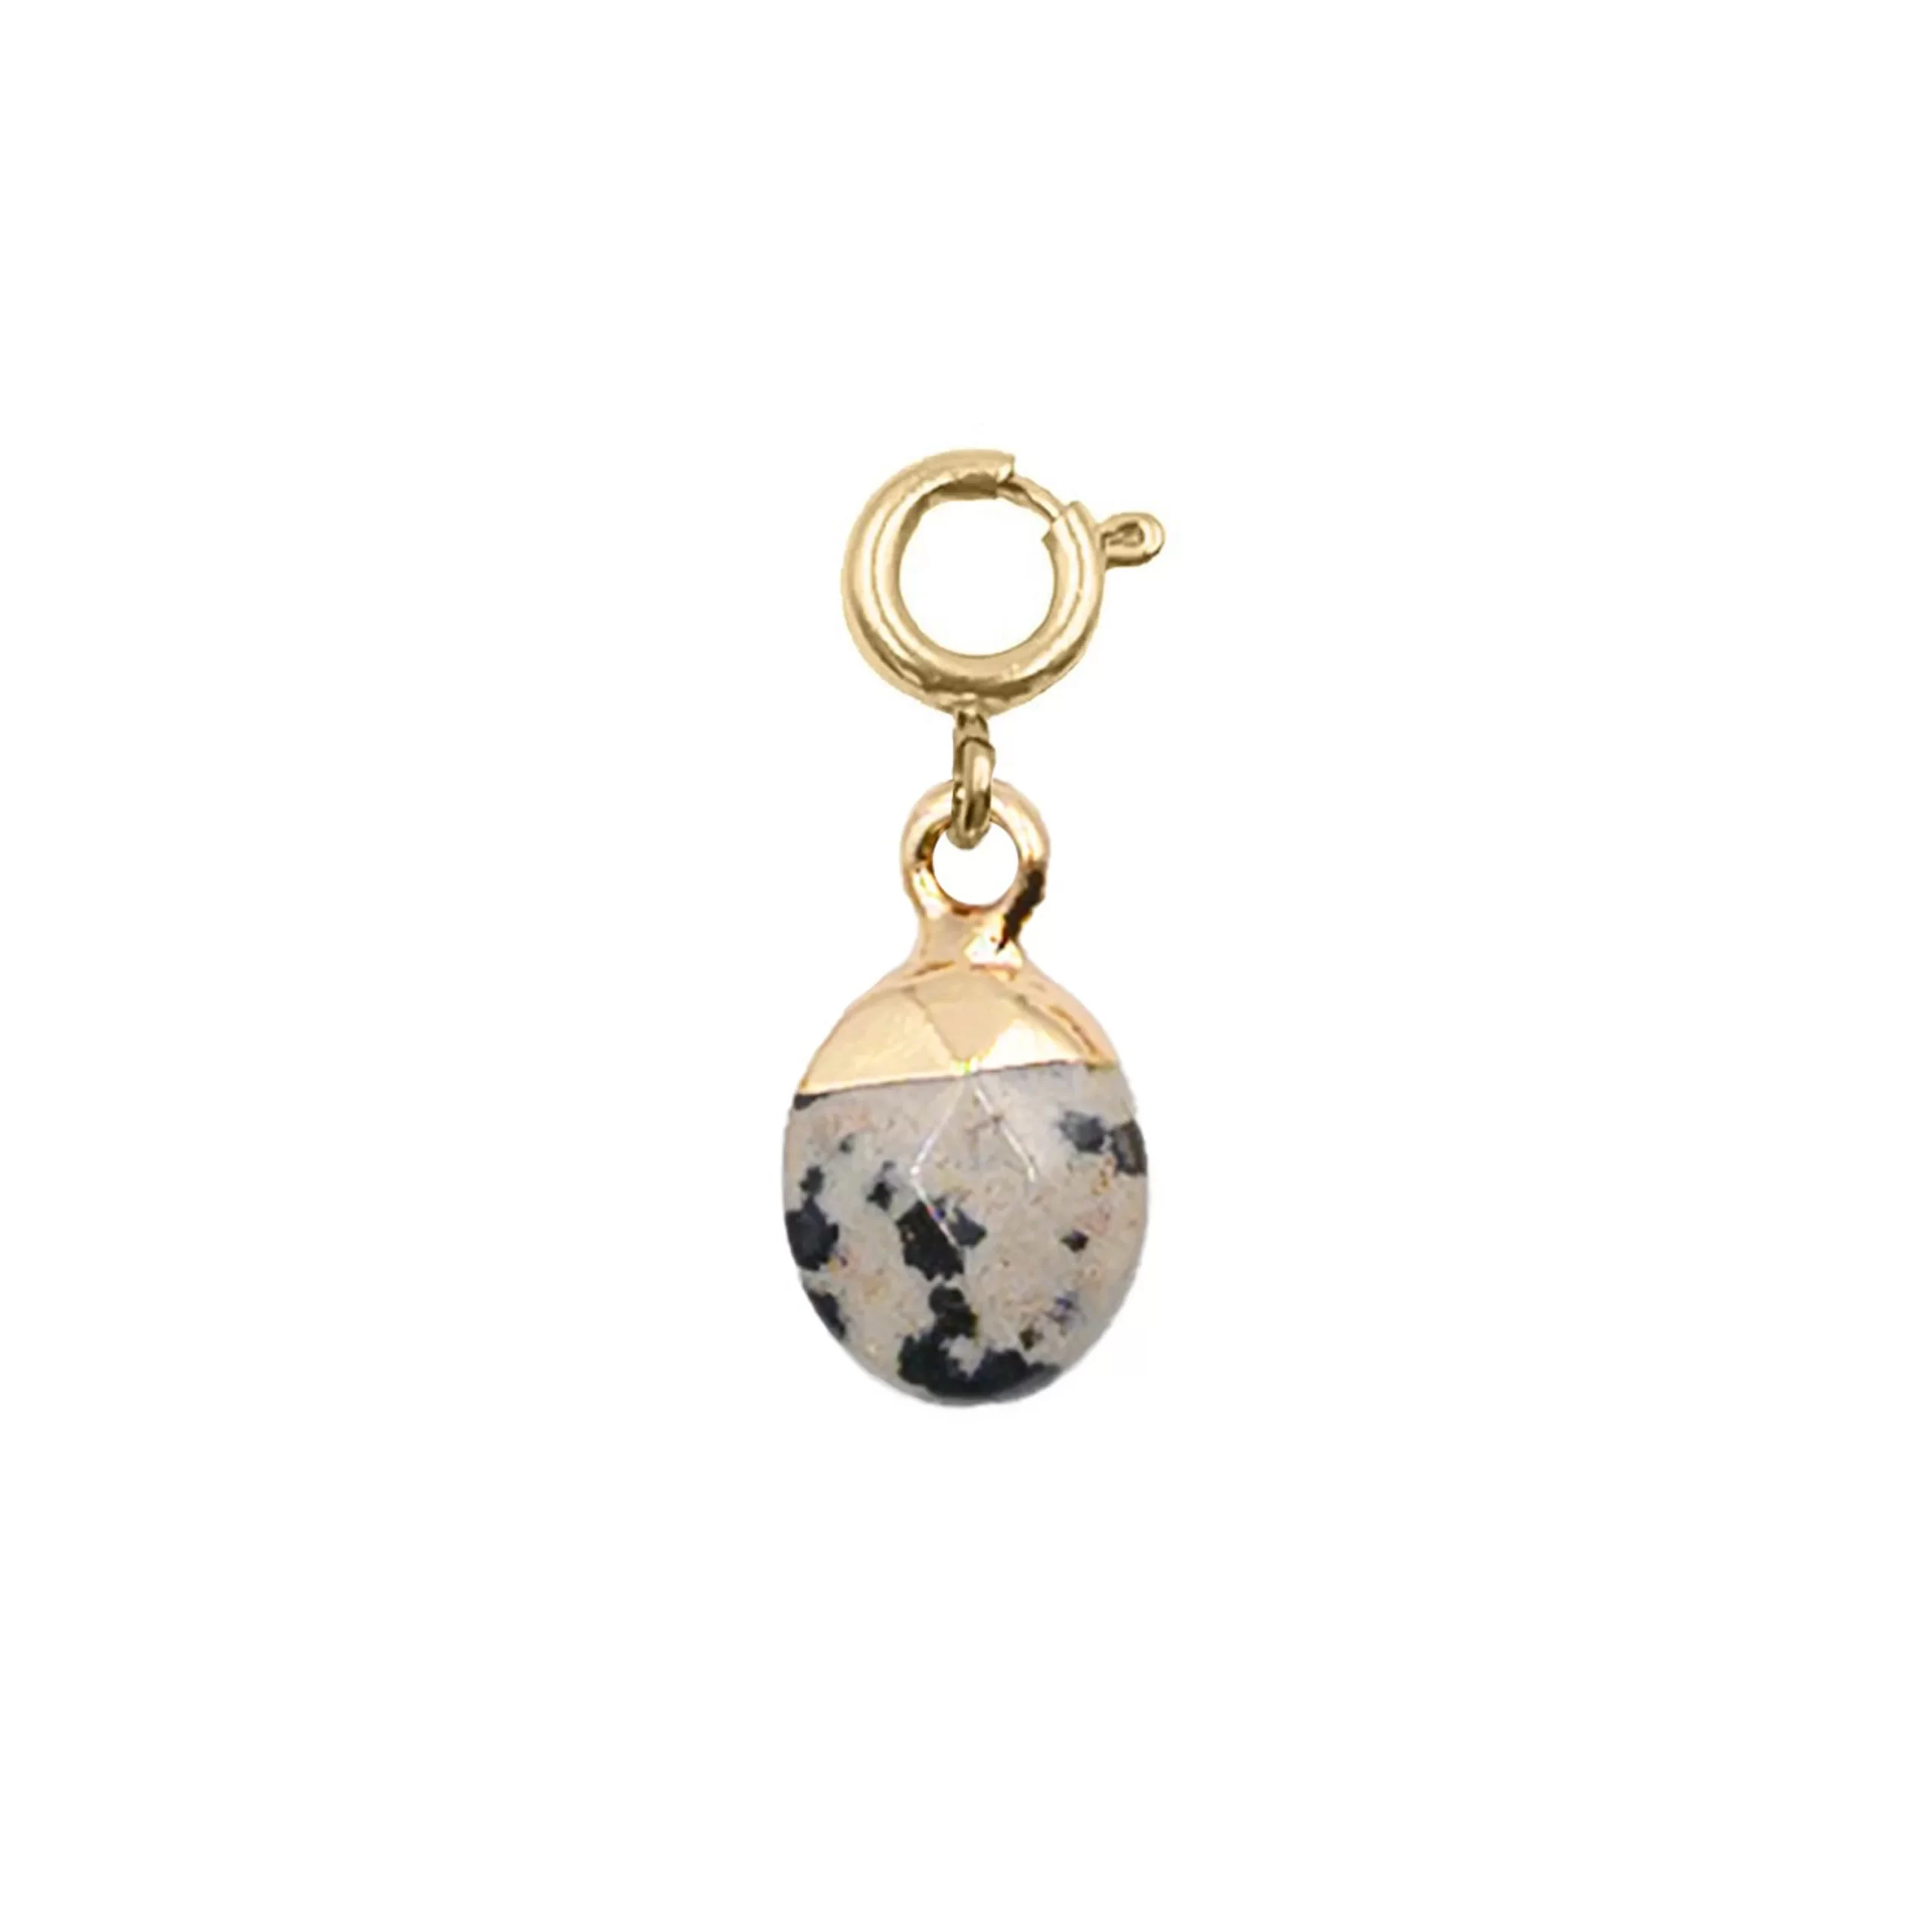 SPECKLE DIPPED OVAL CHARM